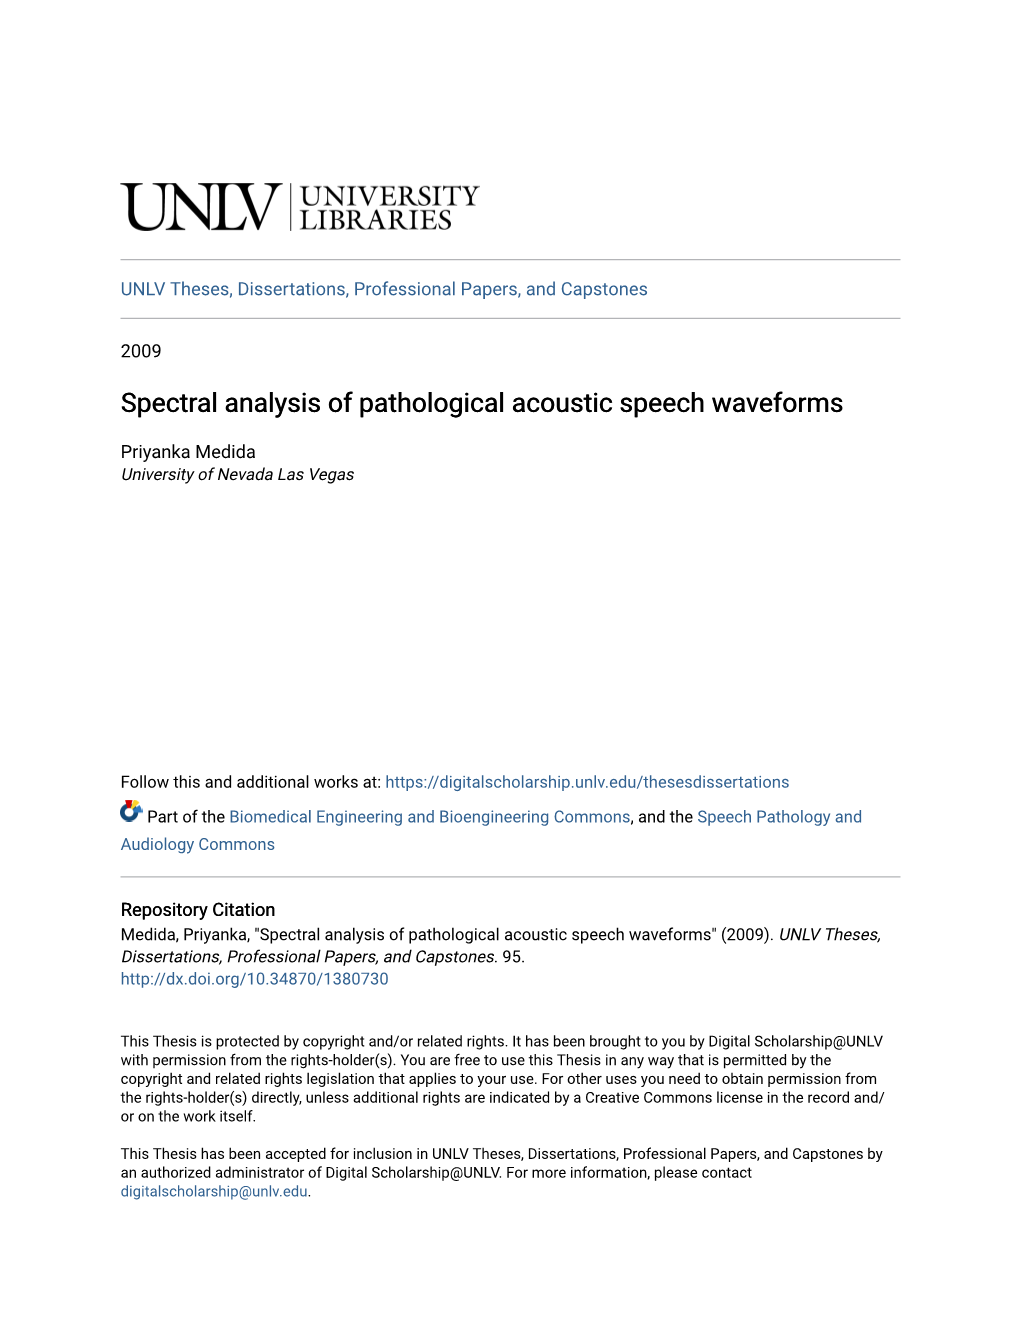 Spectral Analysis of Pathological Acoustic Speech Waveforms